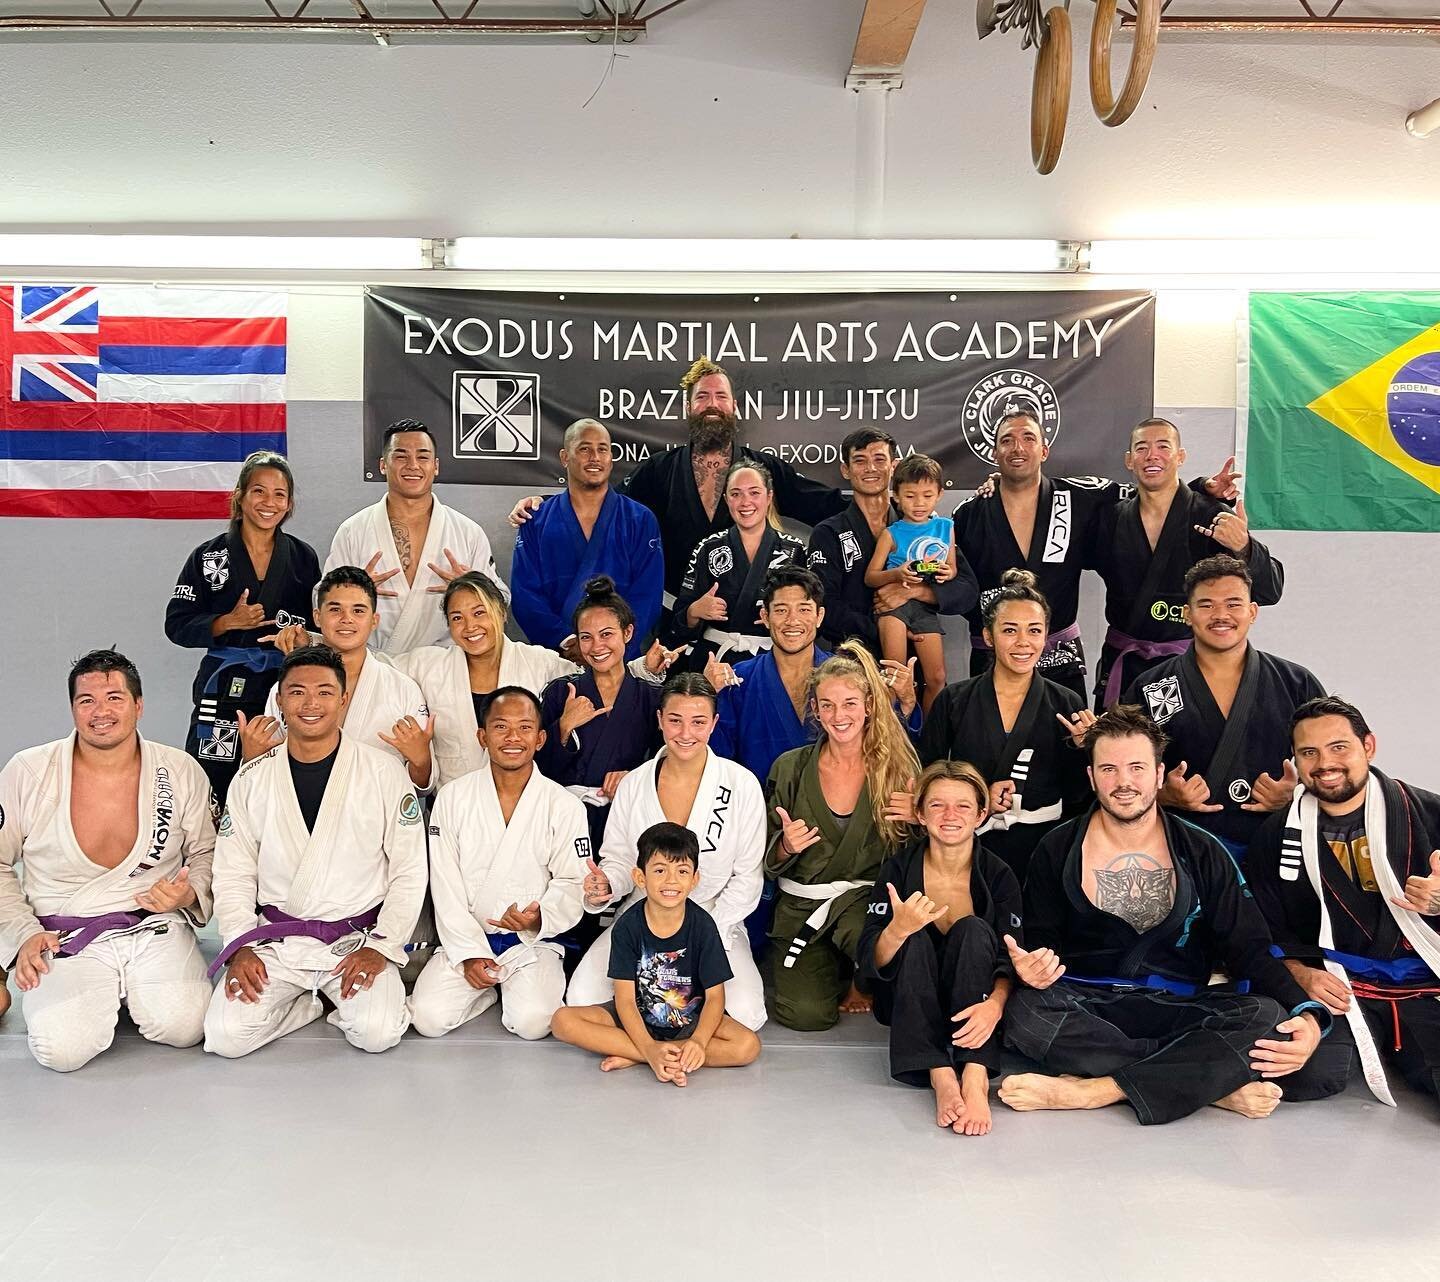 Congratulations to Sean and Jason for getting promoted to blue belt tonight as well as to everyone who got stripes! 🔥 The hardest part about jiujitsu is showing up, so if you took that step you&rsquo;re on the right track. 💯 We are so proud of all 